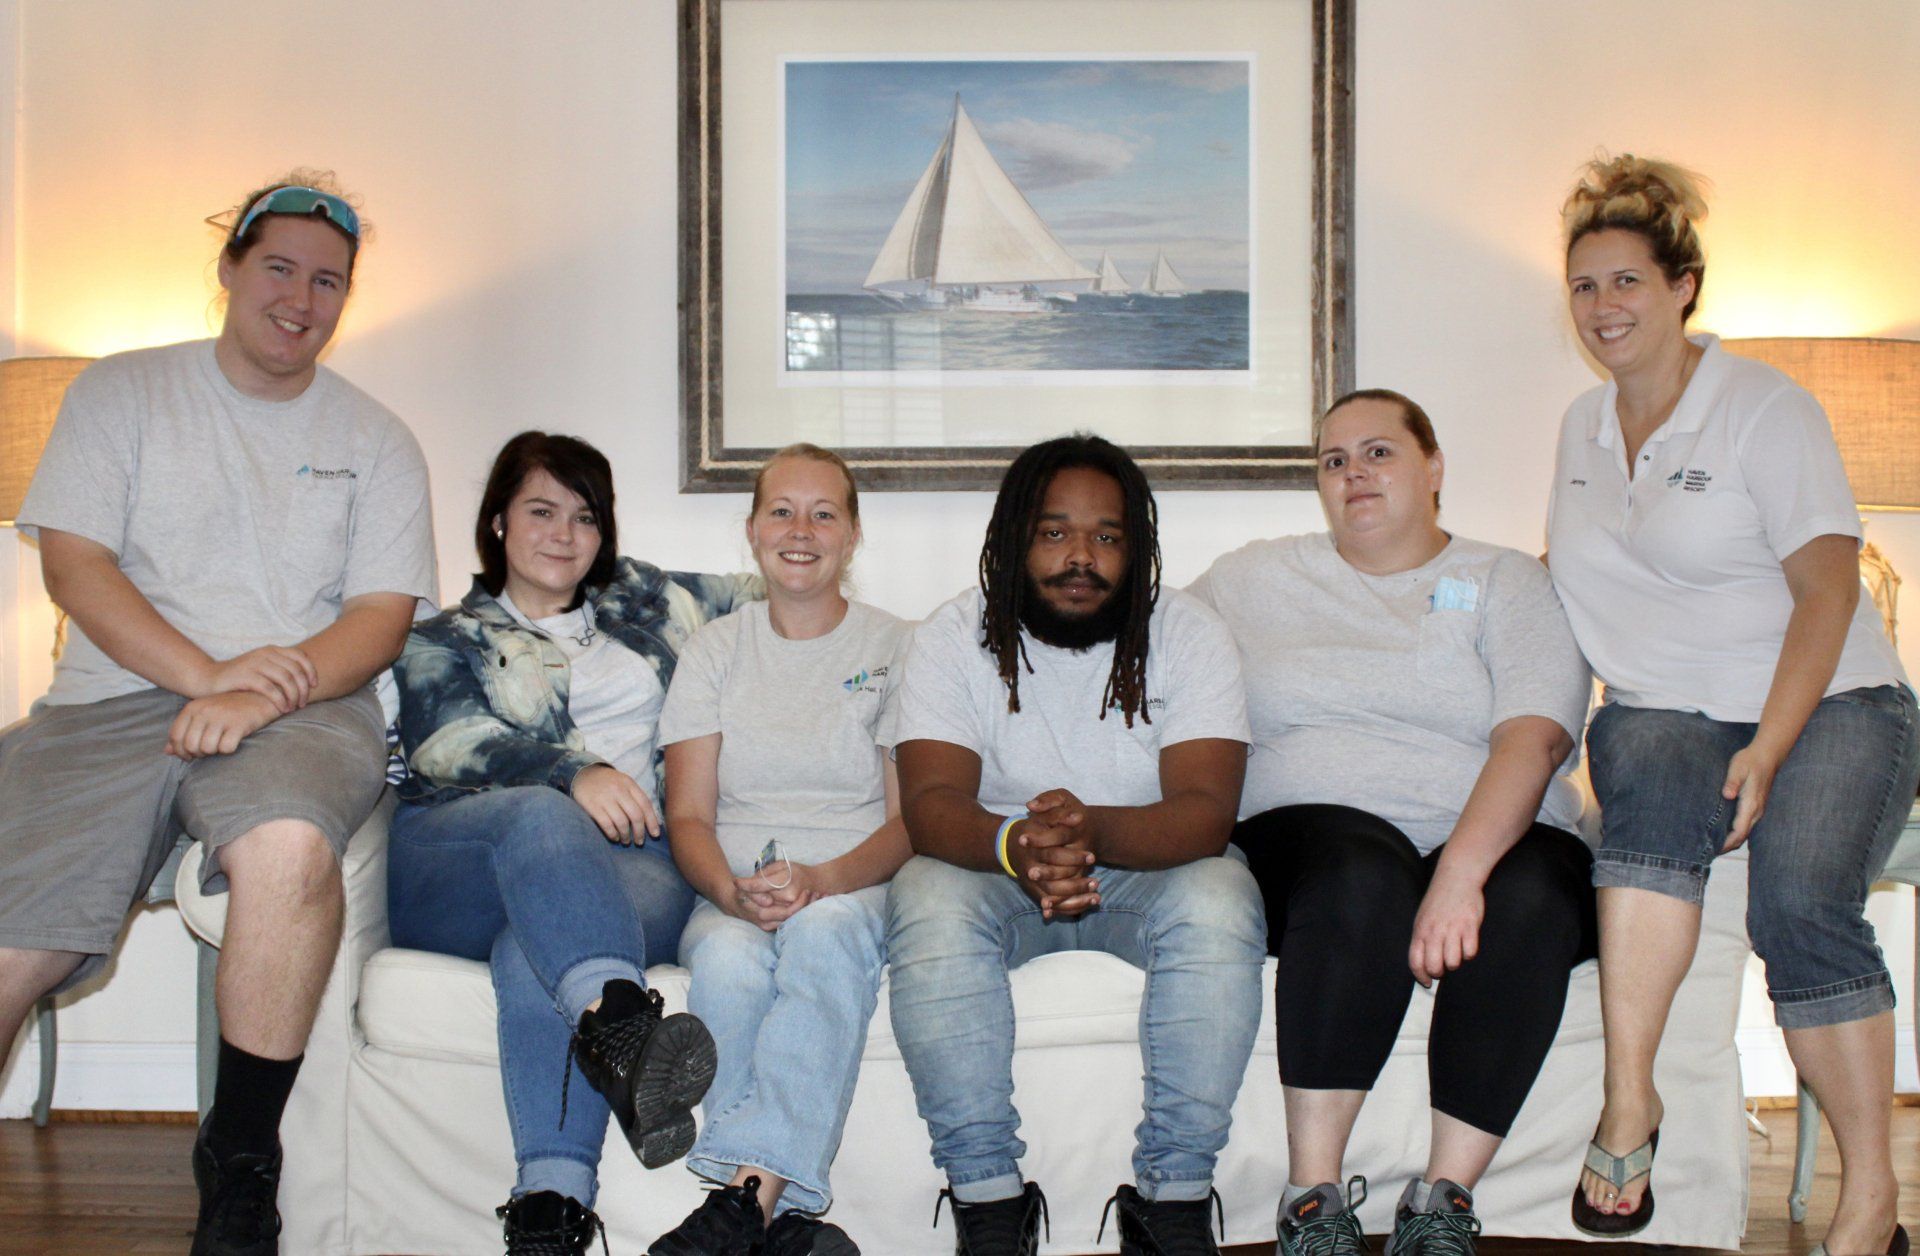 Employees pose for a group photo on a sofa under painting of sailboat